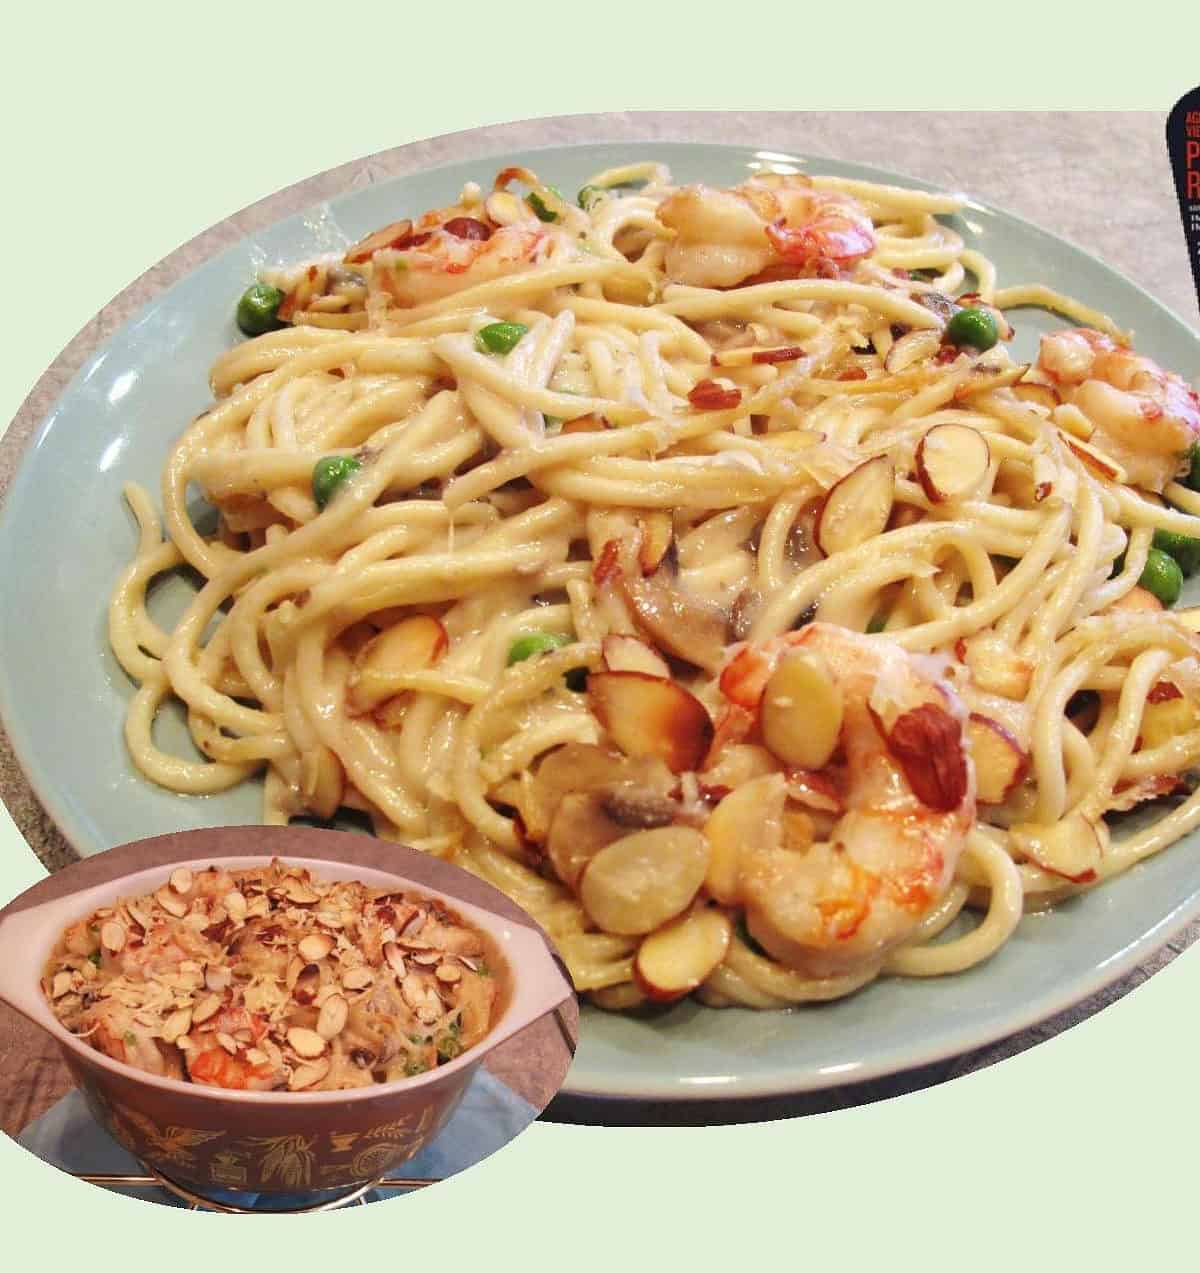  Packed with flavorful shrimp, scallops, and crab meat